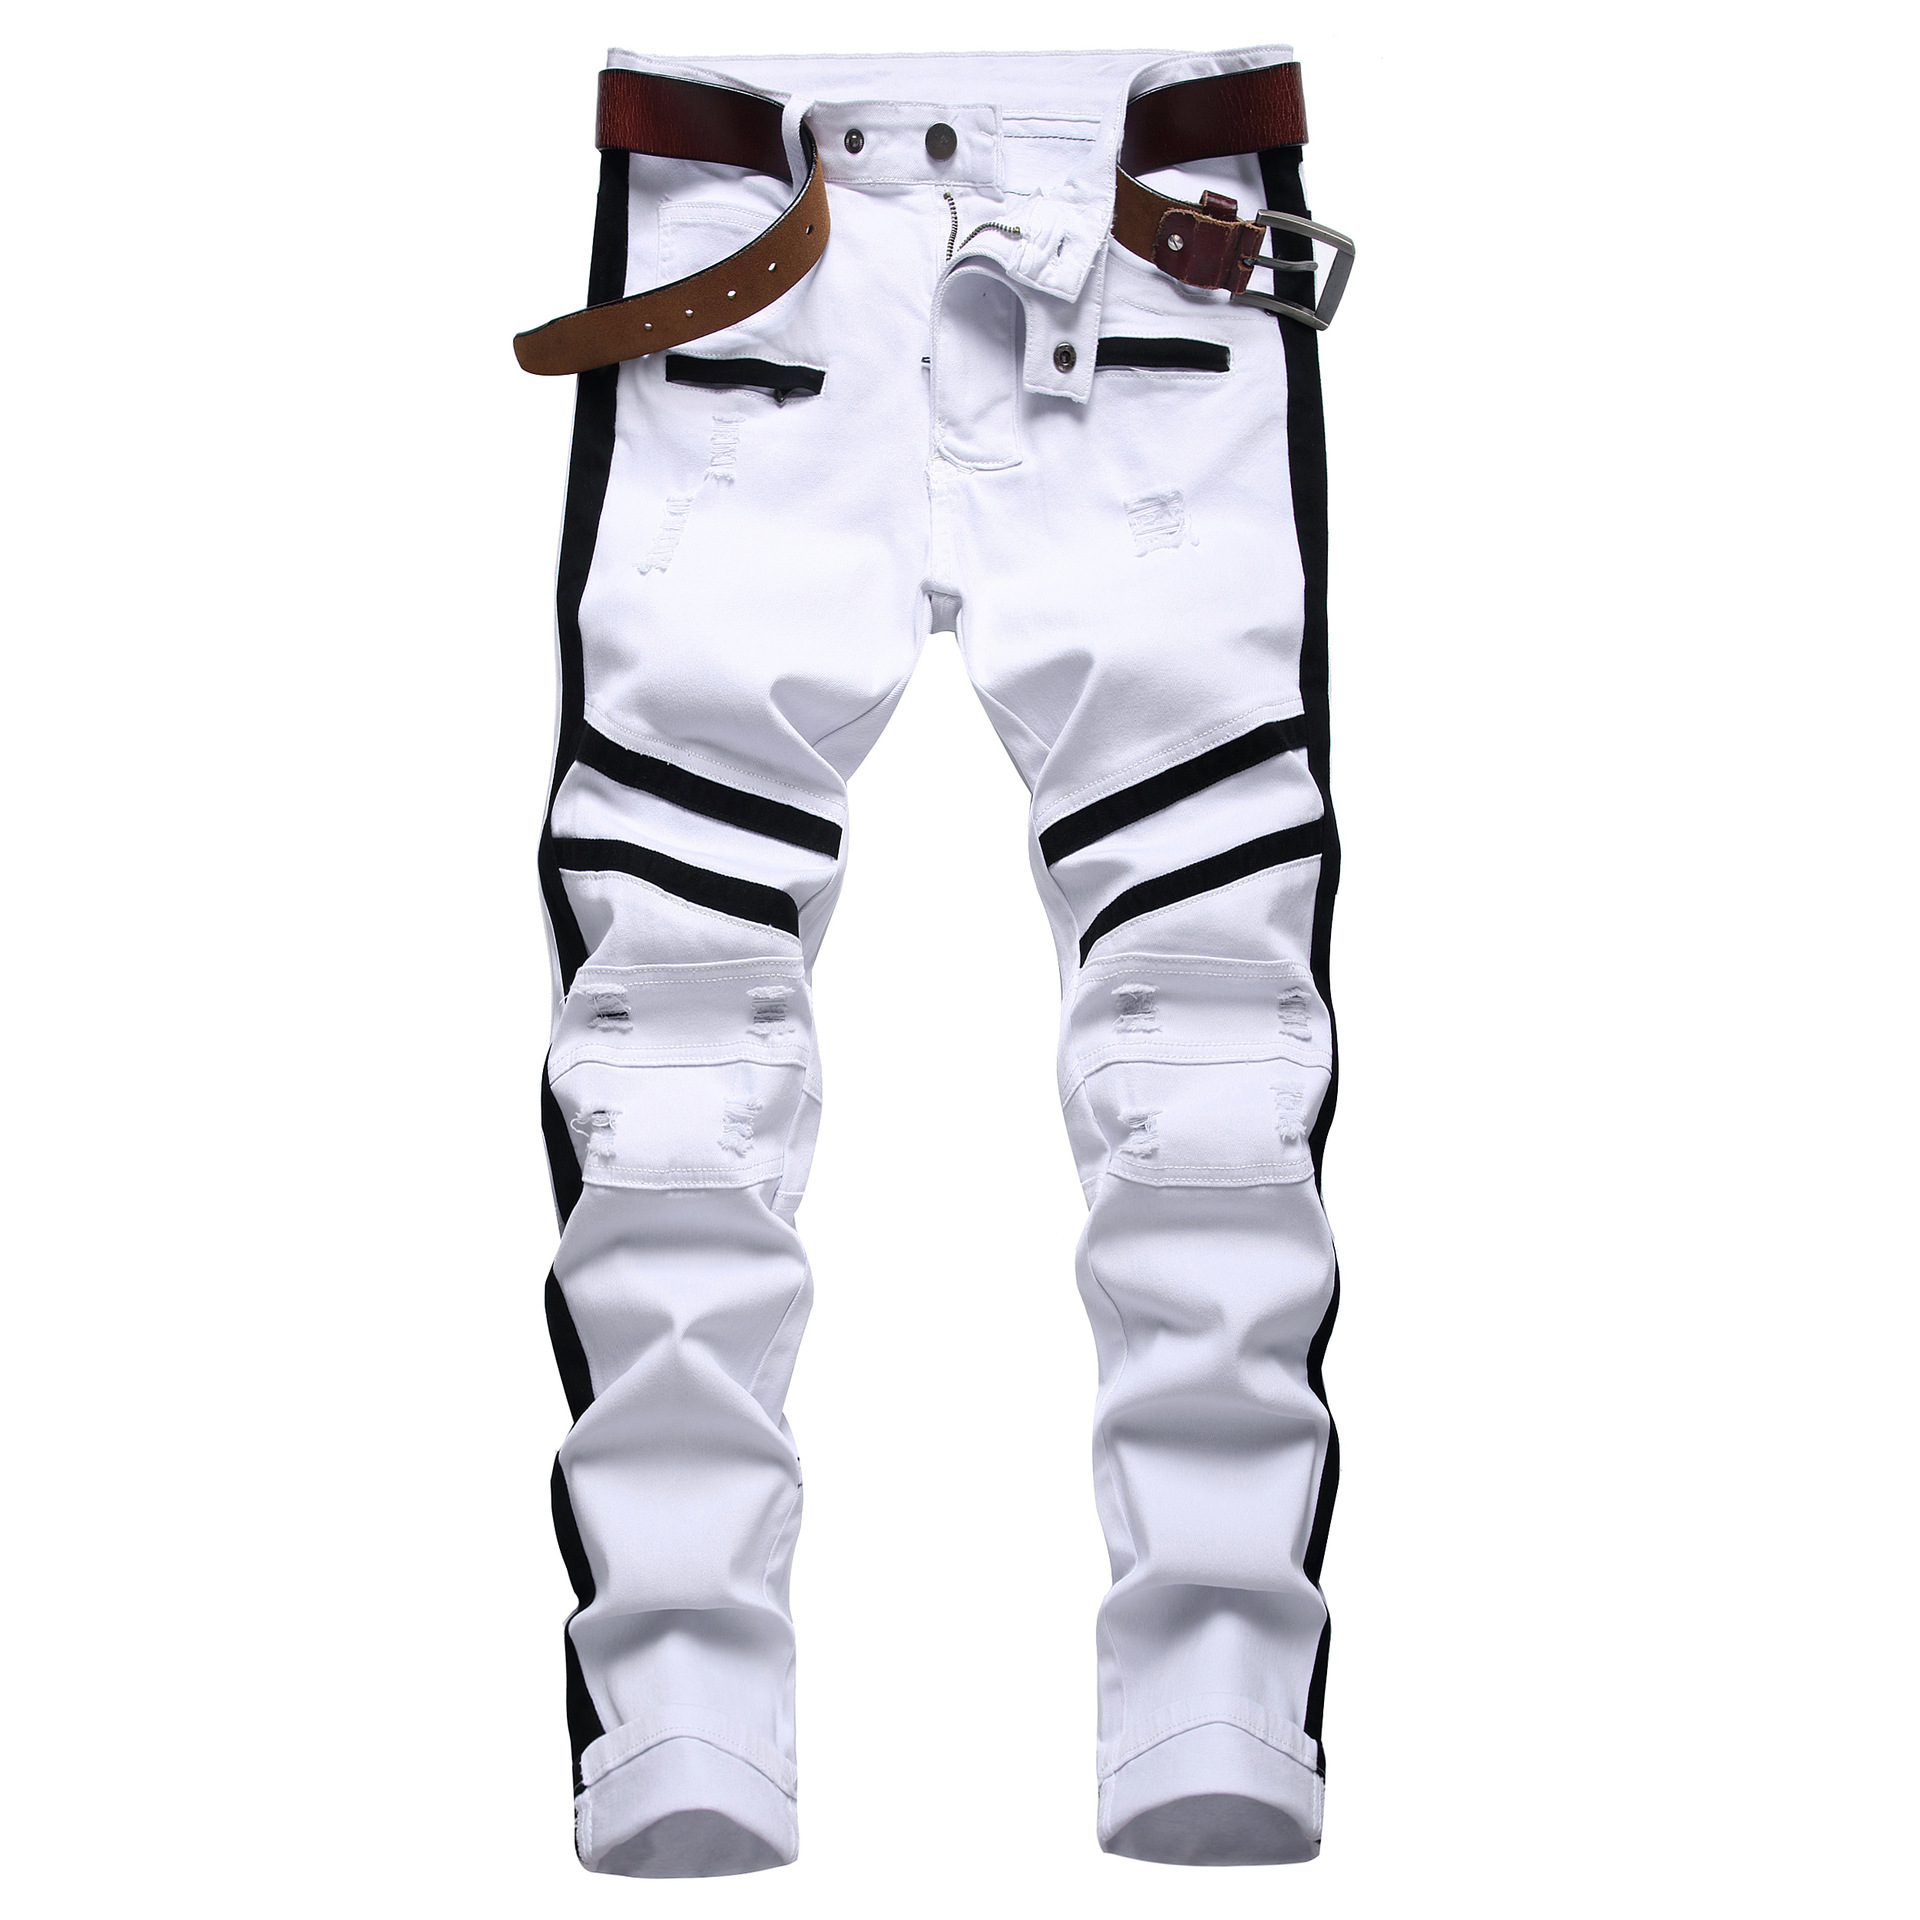 Hot Sale for High Rise Relaxed Fit Jeans - White Zip Jeans Black Trim Stretch Ripped Men’s Casual Jeans Trousers – Yulin